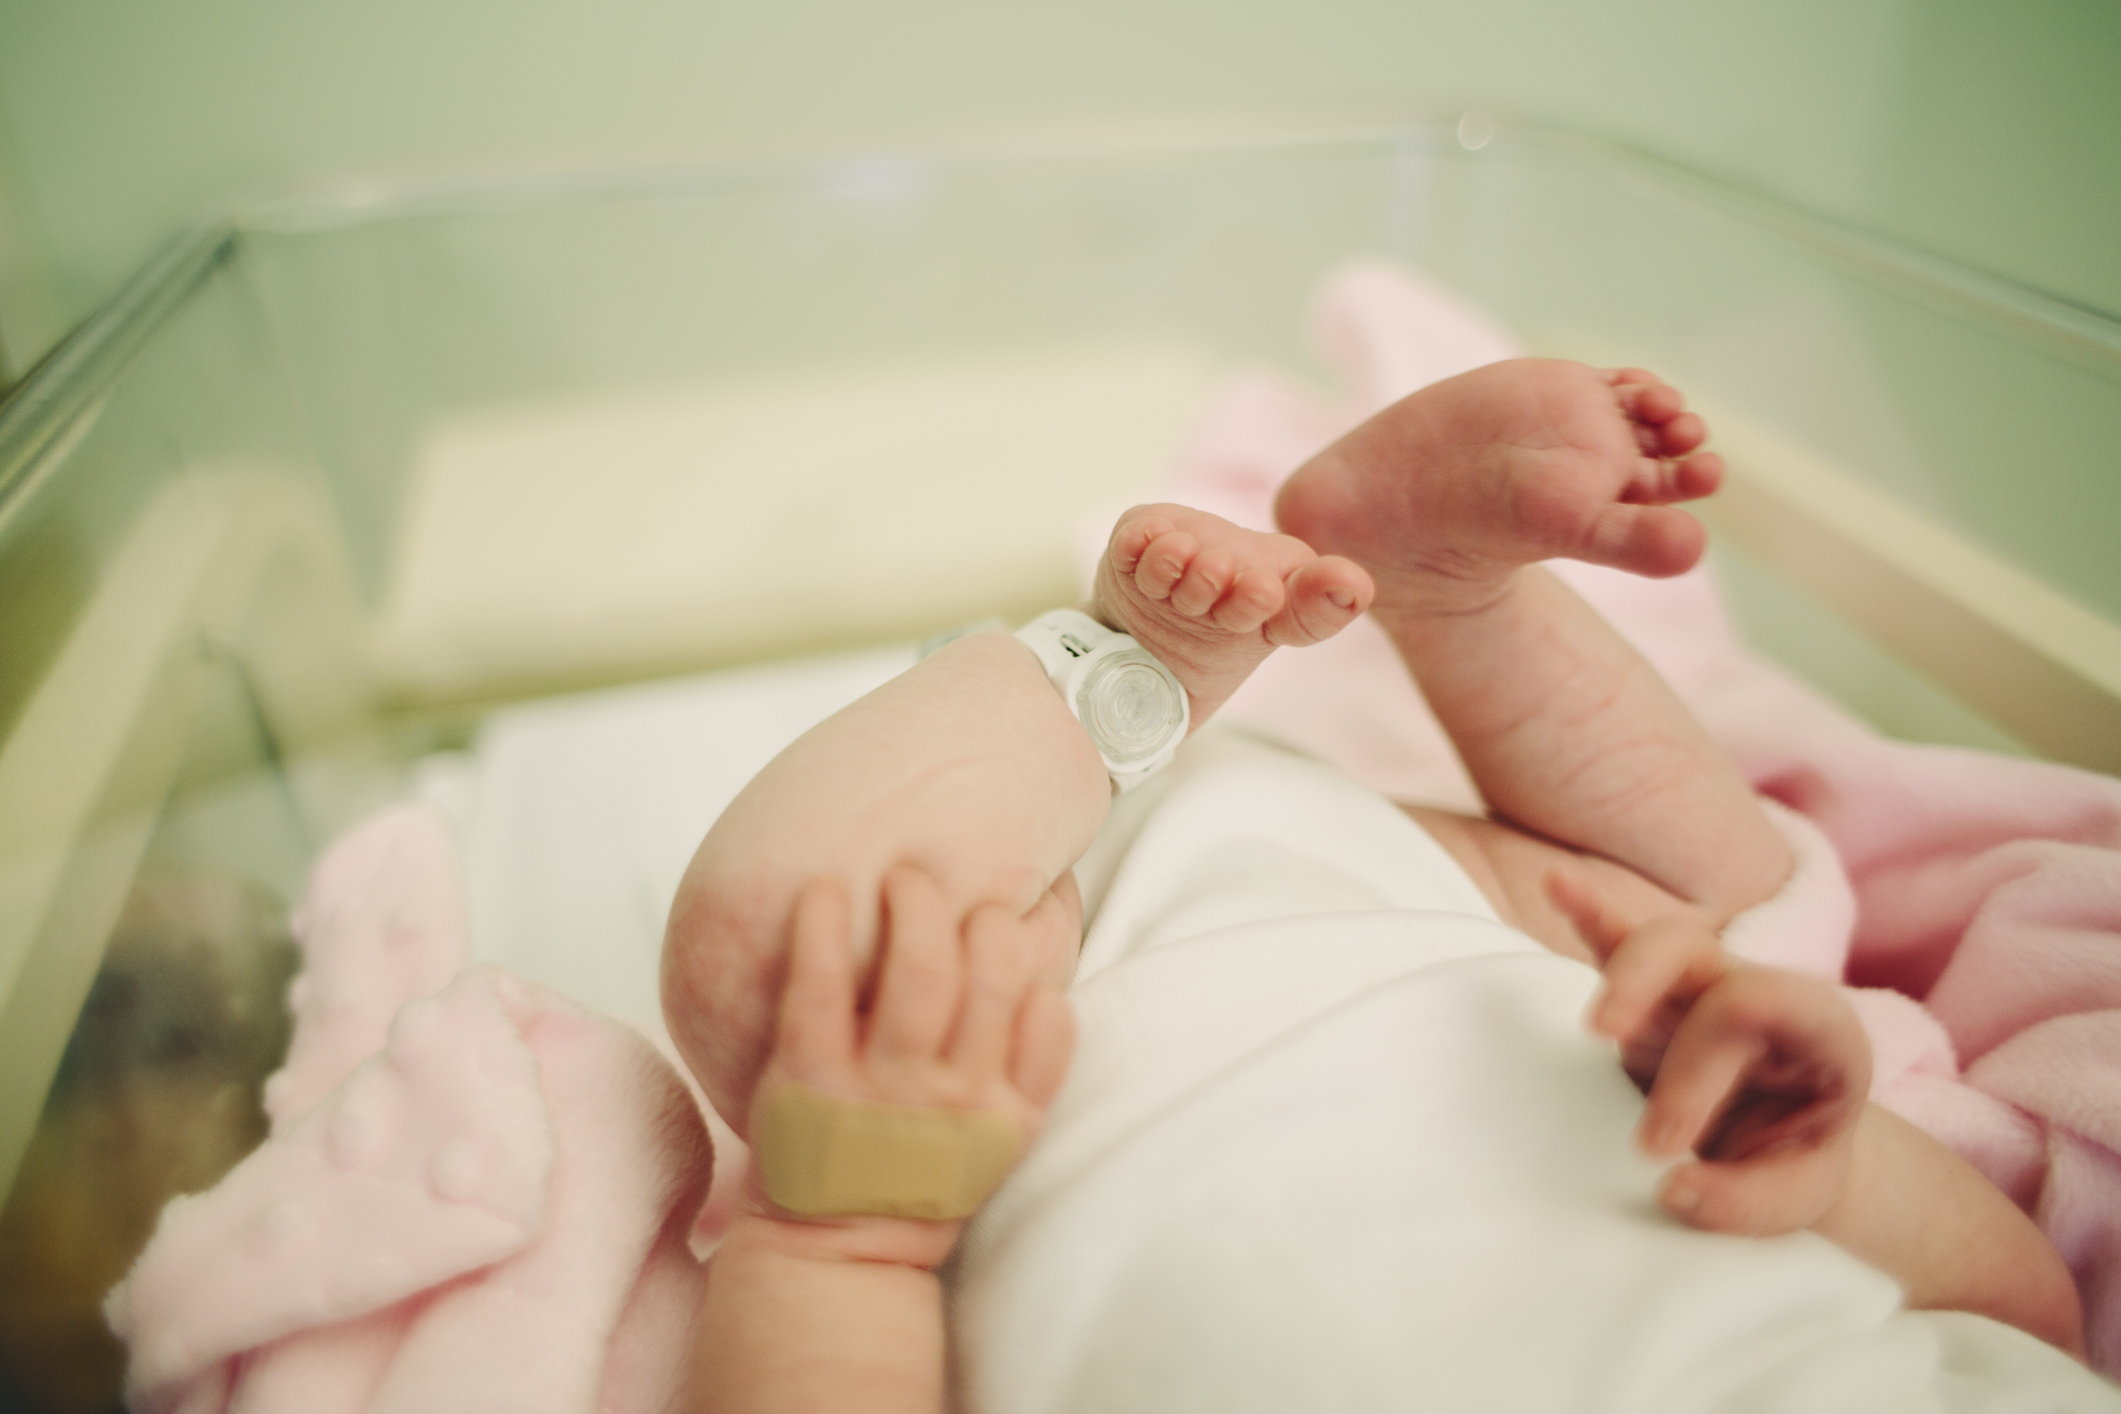 America had the lowest birth in 35 years in 2019